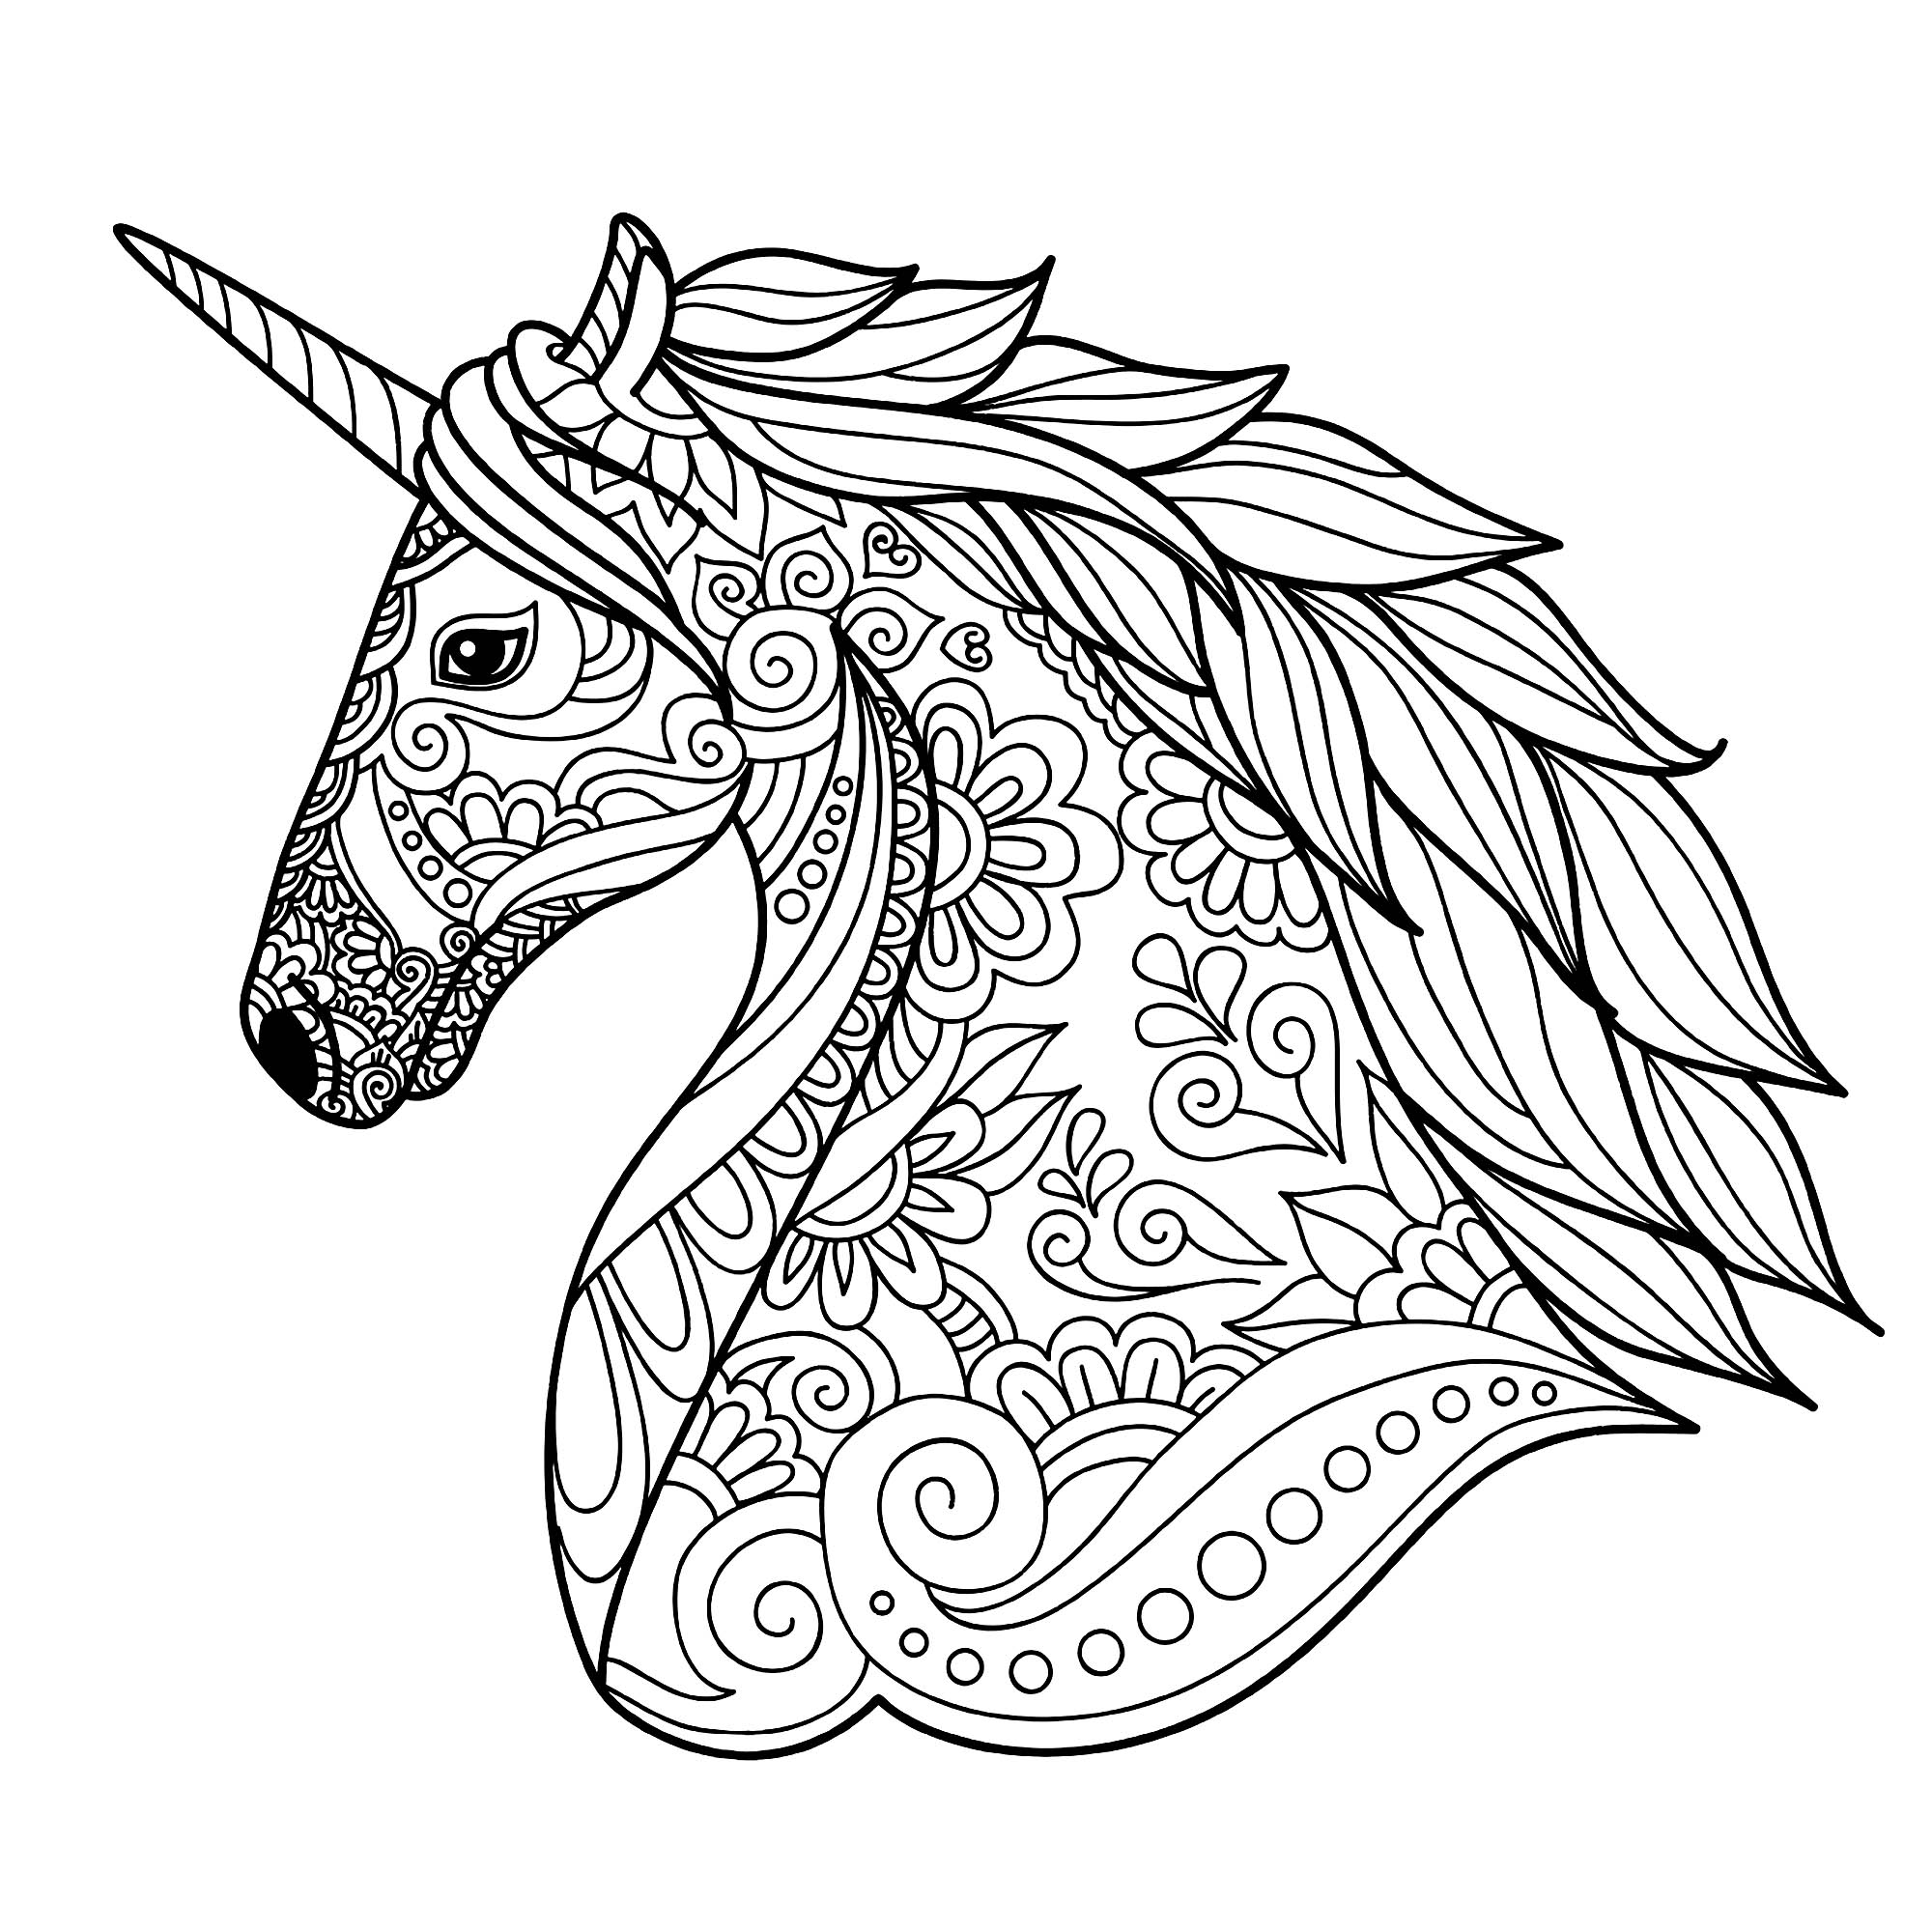 Coloring Pages : Unicorns Free To Color For Children Kids Coloring ...